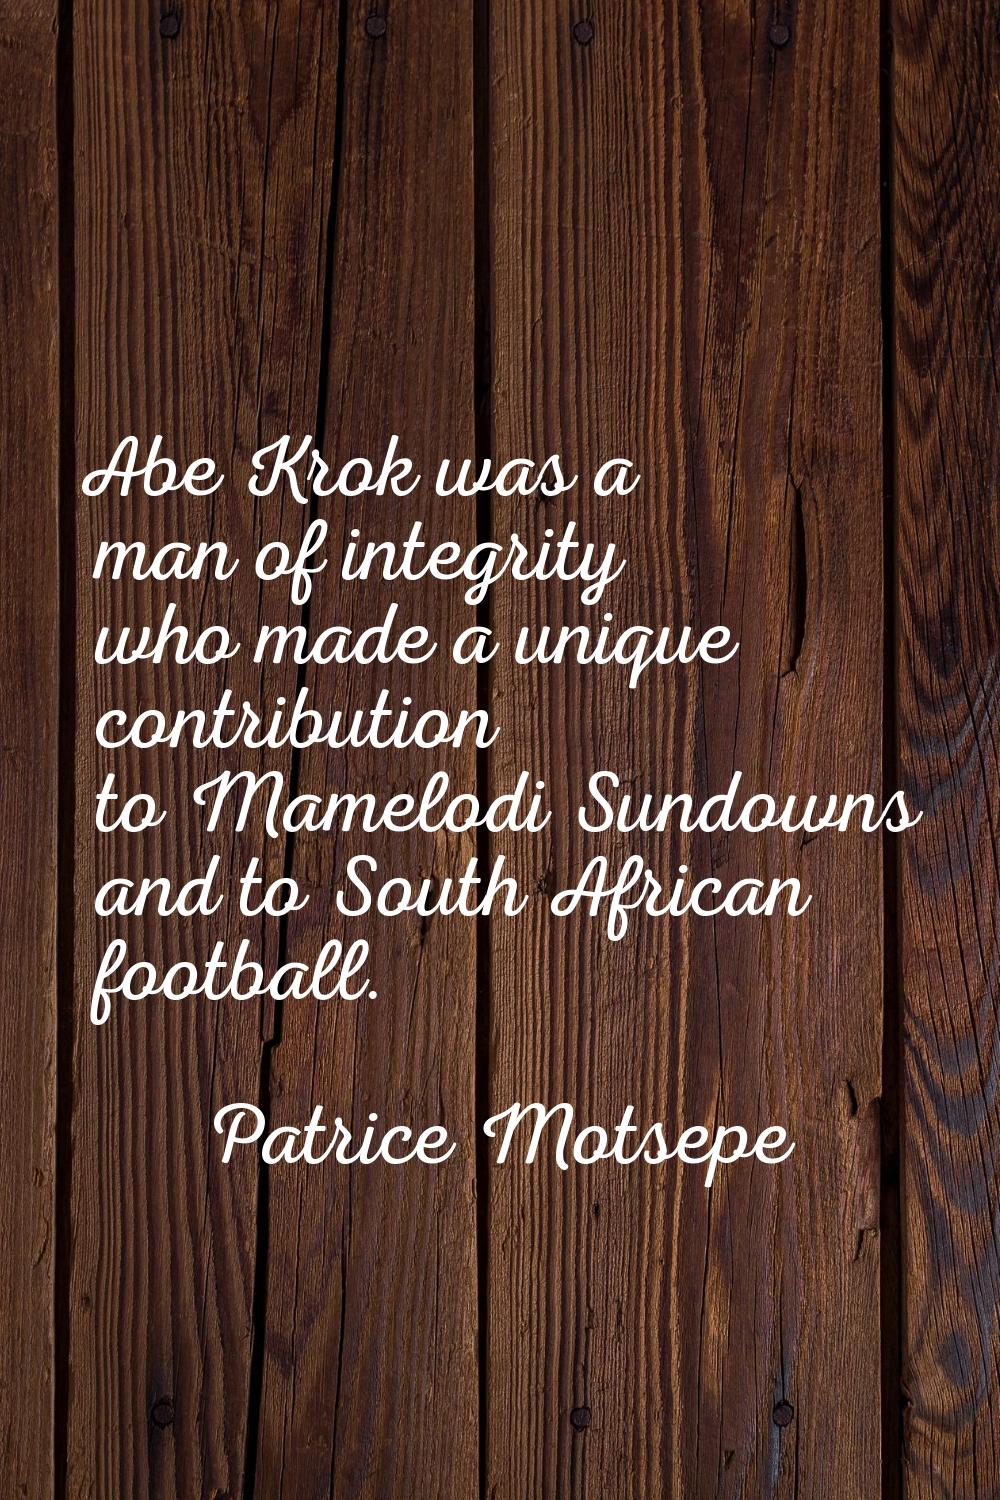 Abe Krok was a man of integrity who made a unique contribution to Mamelodi Sundowns and to South Af